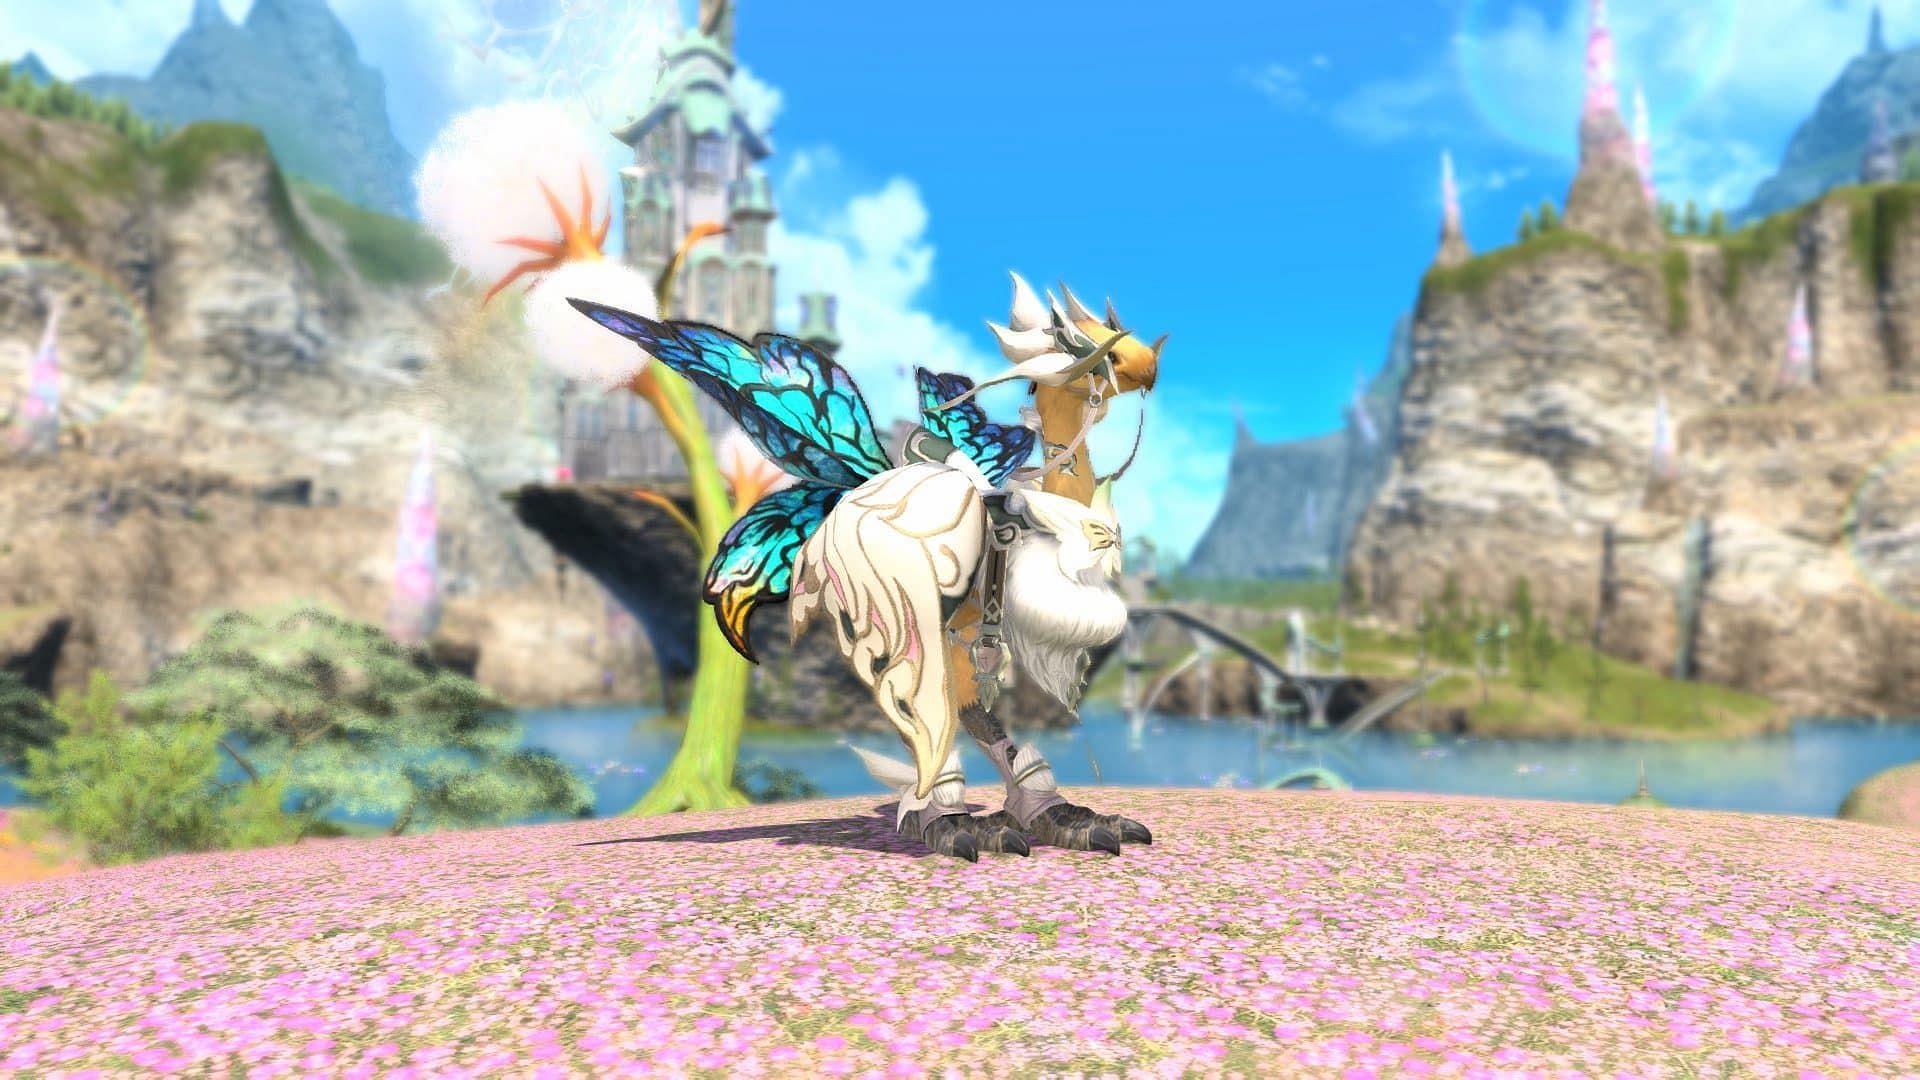 Players can acquire various items during the Final Fantasy 14 Moogle Treasure Trove event (Image via Square Enix)